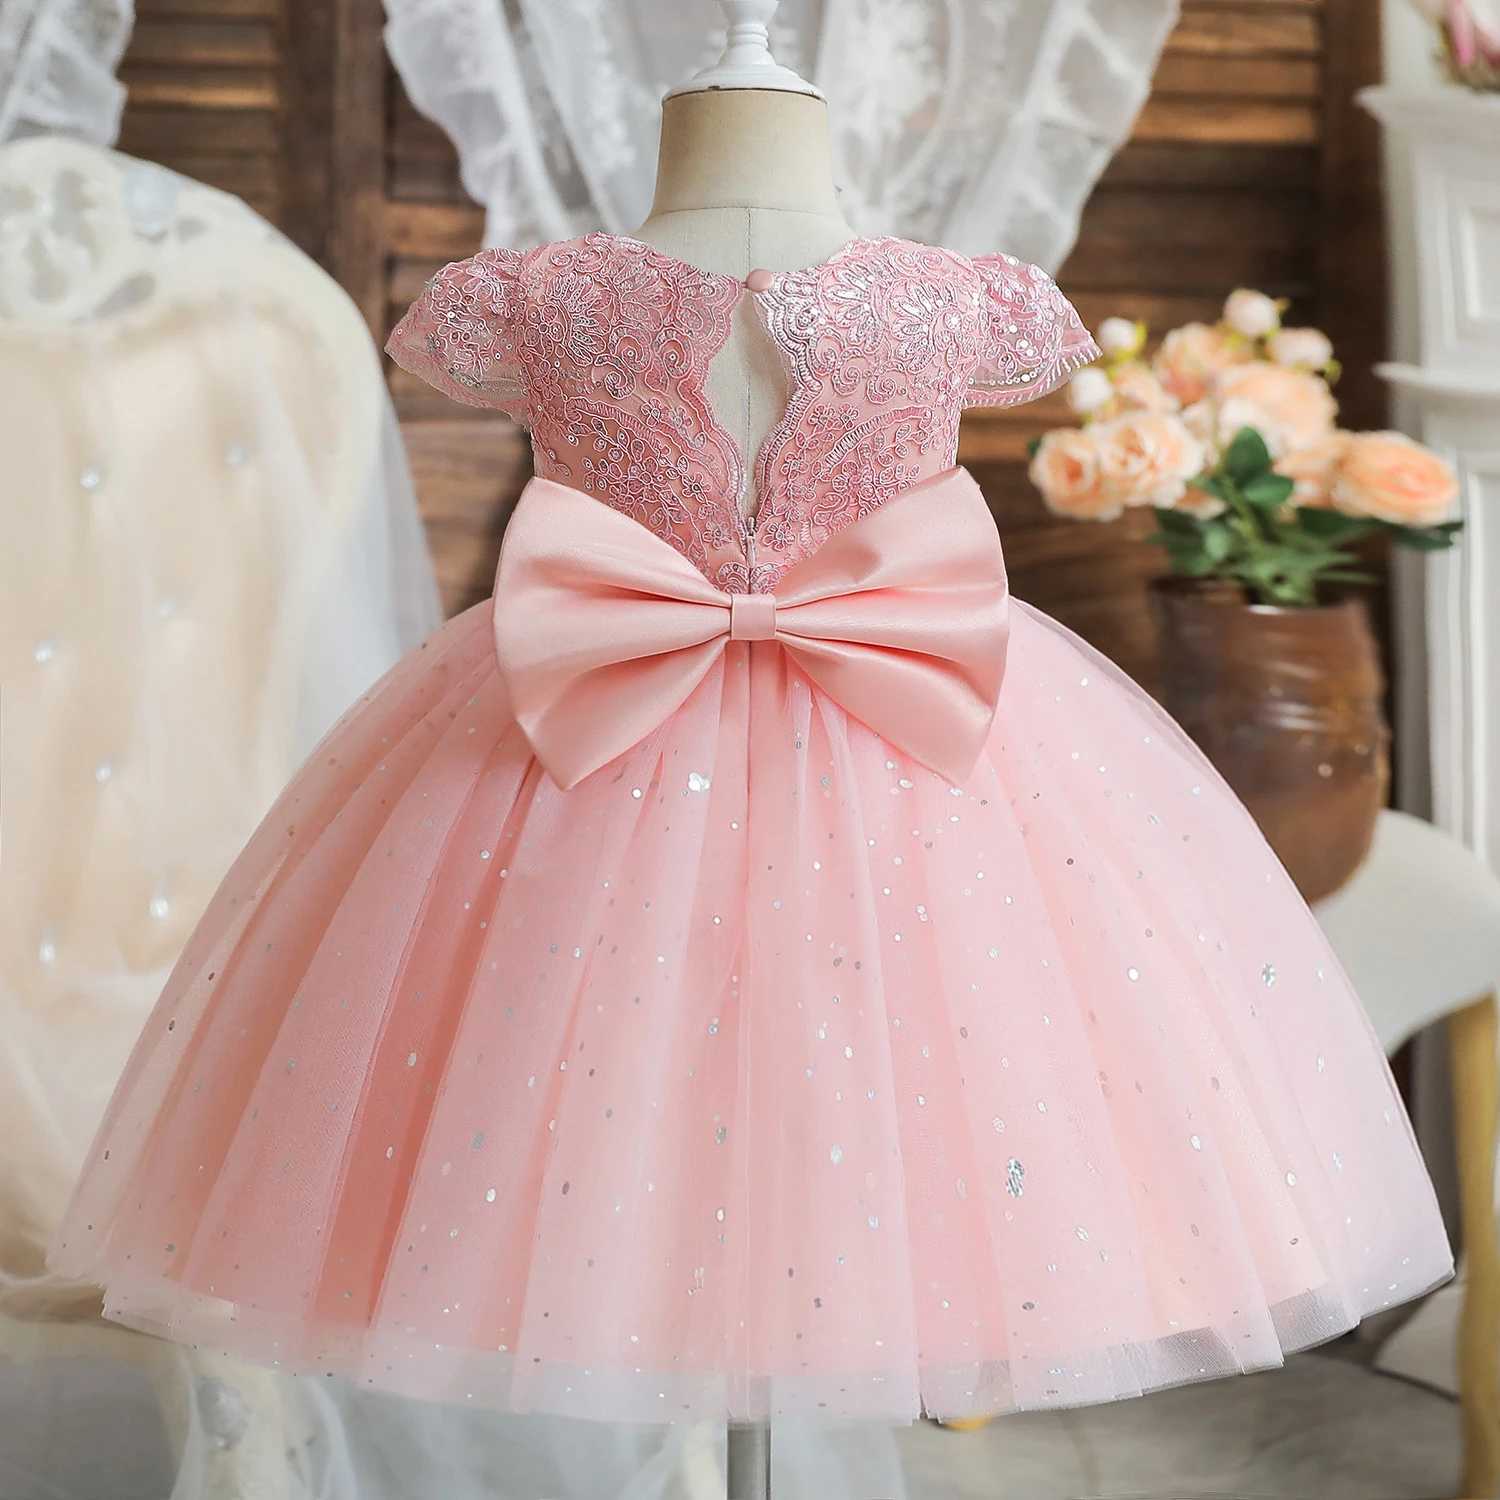 Girl's Dresses 1 to 5 Year Baby Girls Dress Embroidery Lace Infant 1st Birthday Baptism Party Vestidos Toddler Kids Wedding Evening Formal Gown Y240514